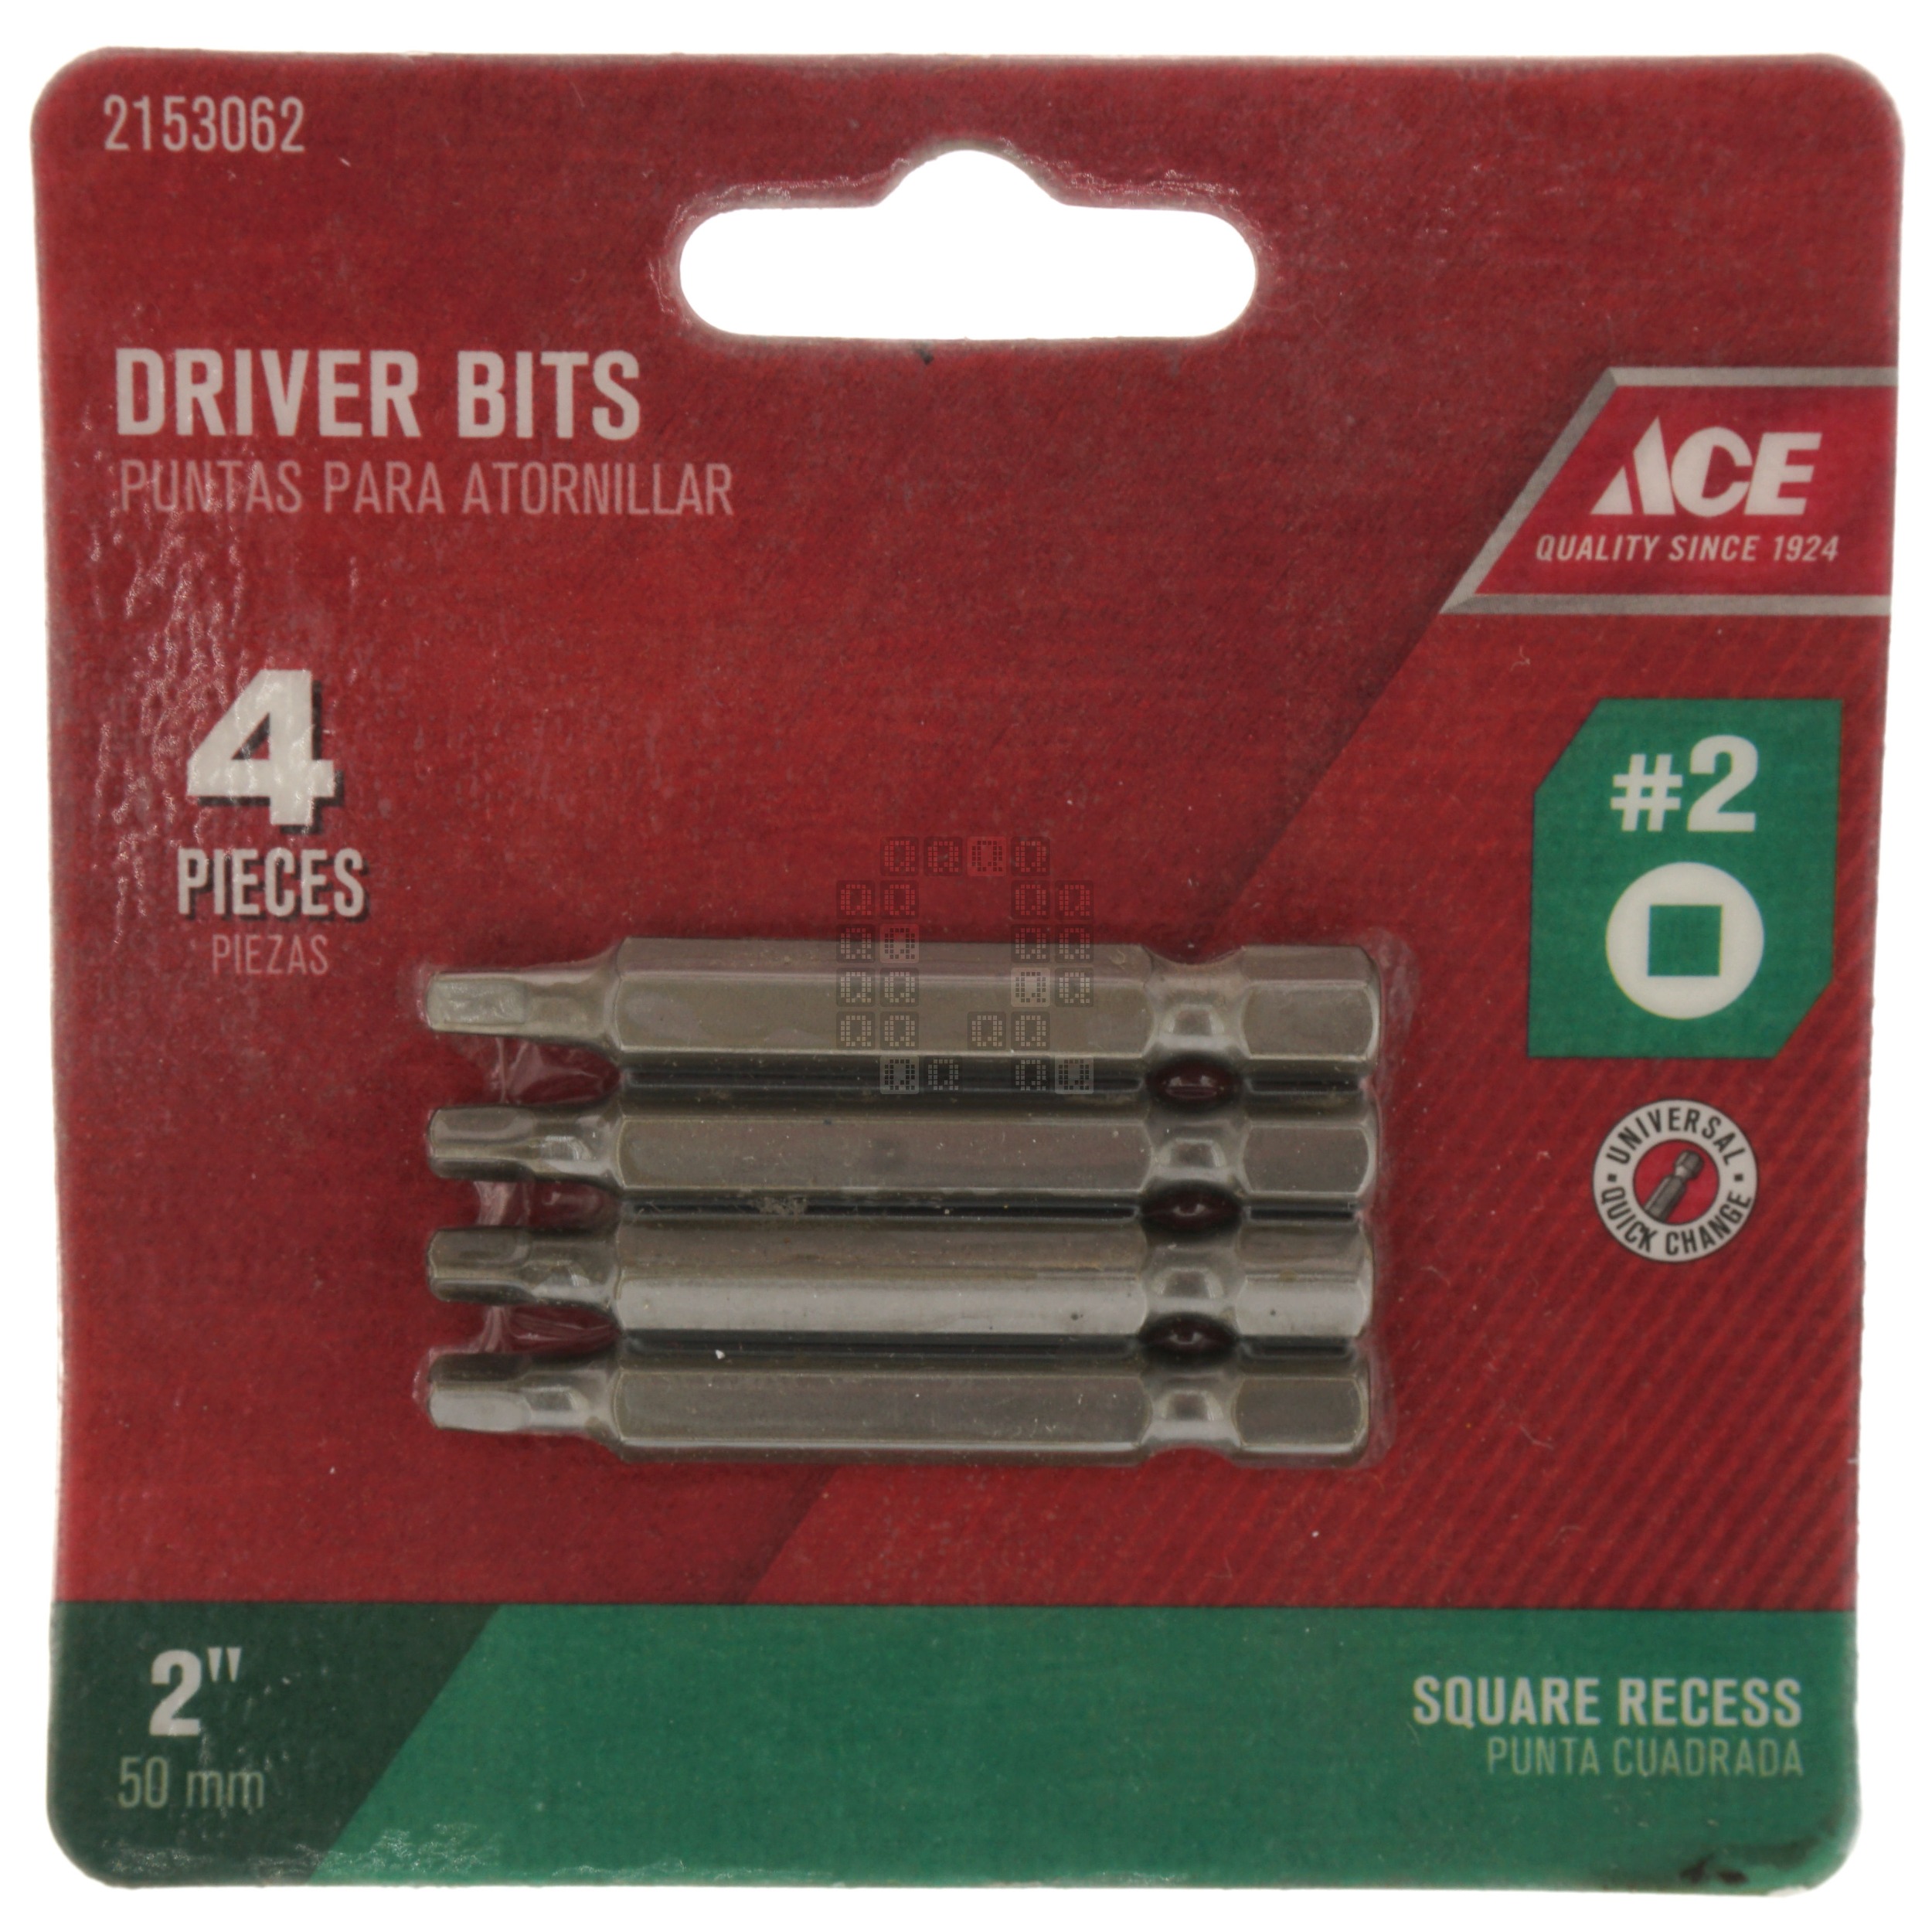 ACE Hardware 2153062 #2 Square / SQ2 Driver Bits, 2" Length, 4-Pack